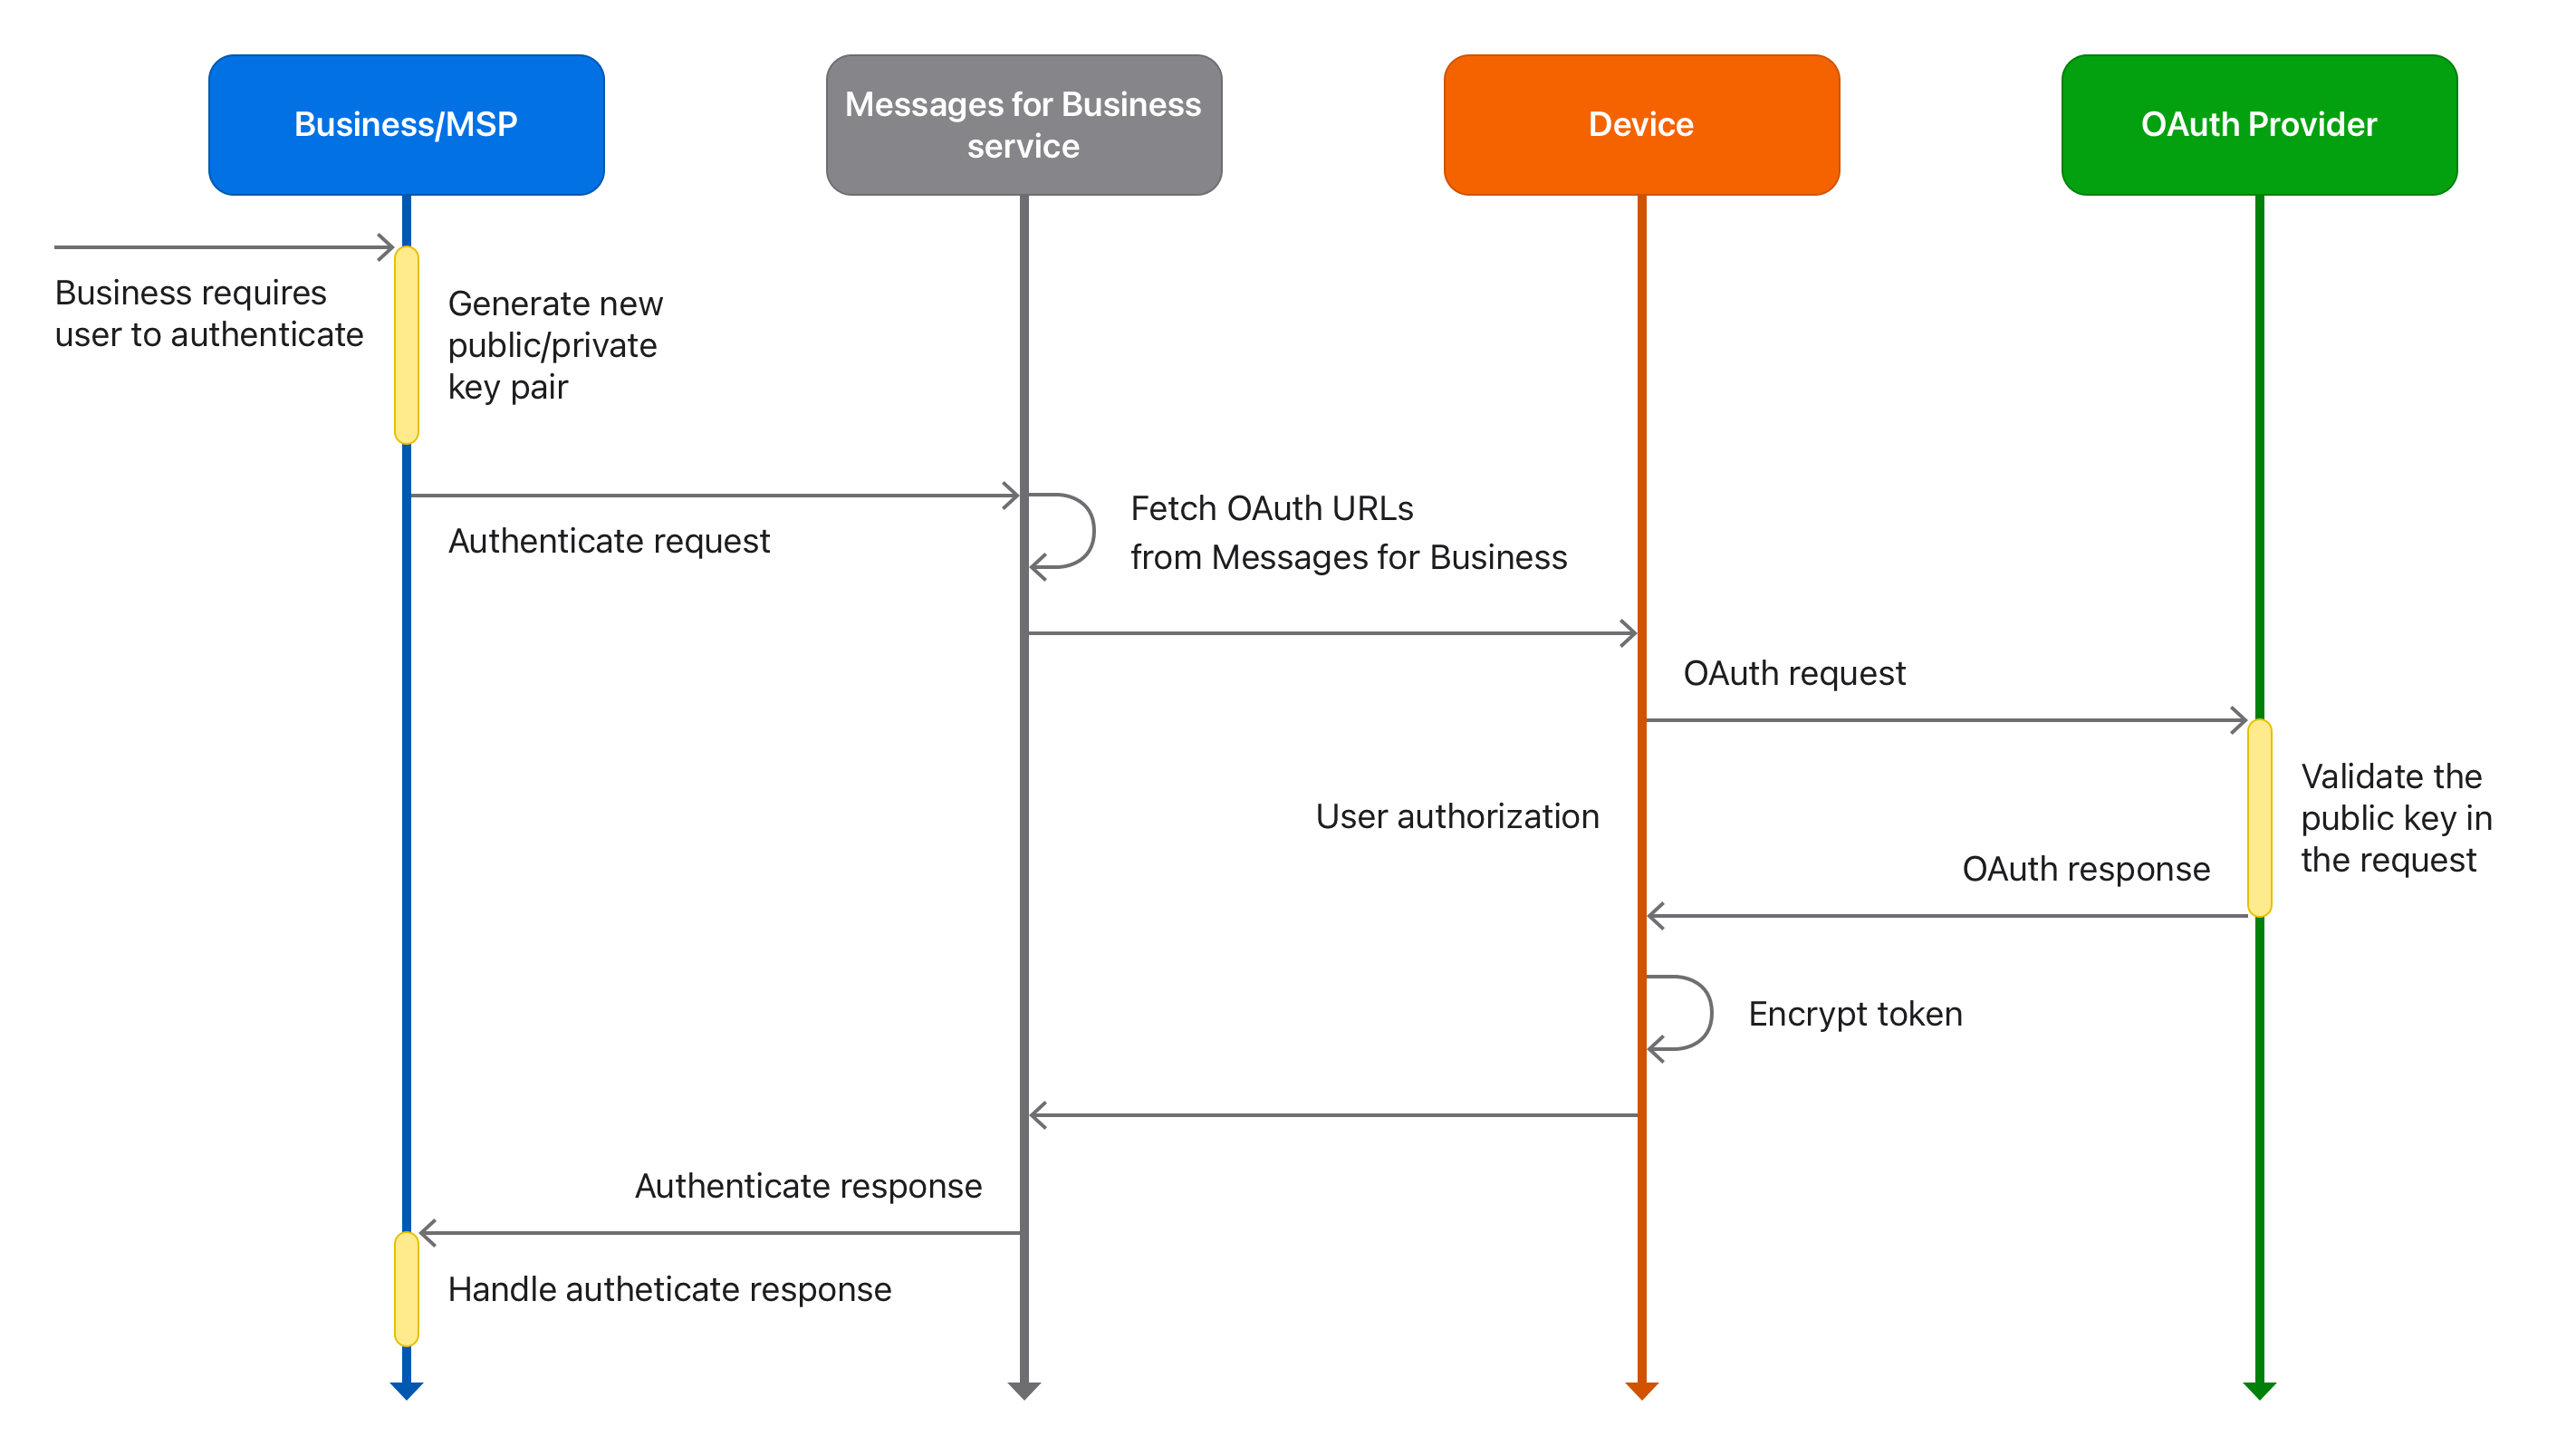 A diagram showing the authentication flow and data as it is passed between a business/MSP and a user's device.